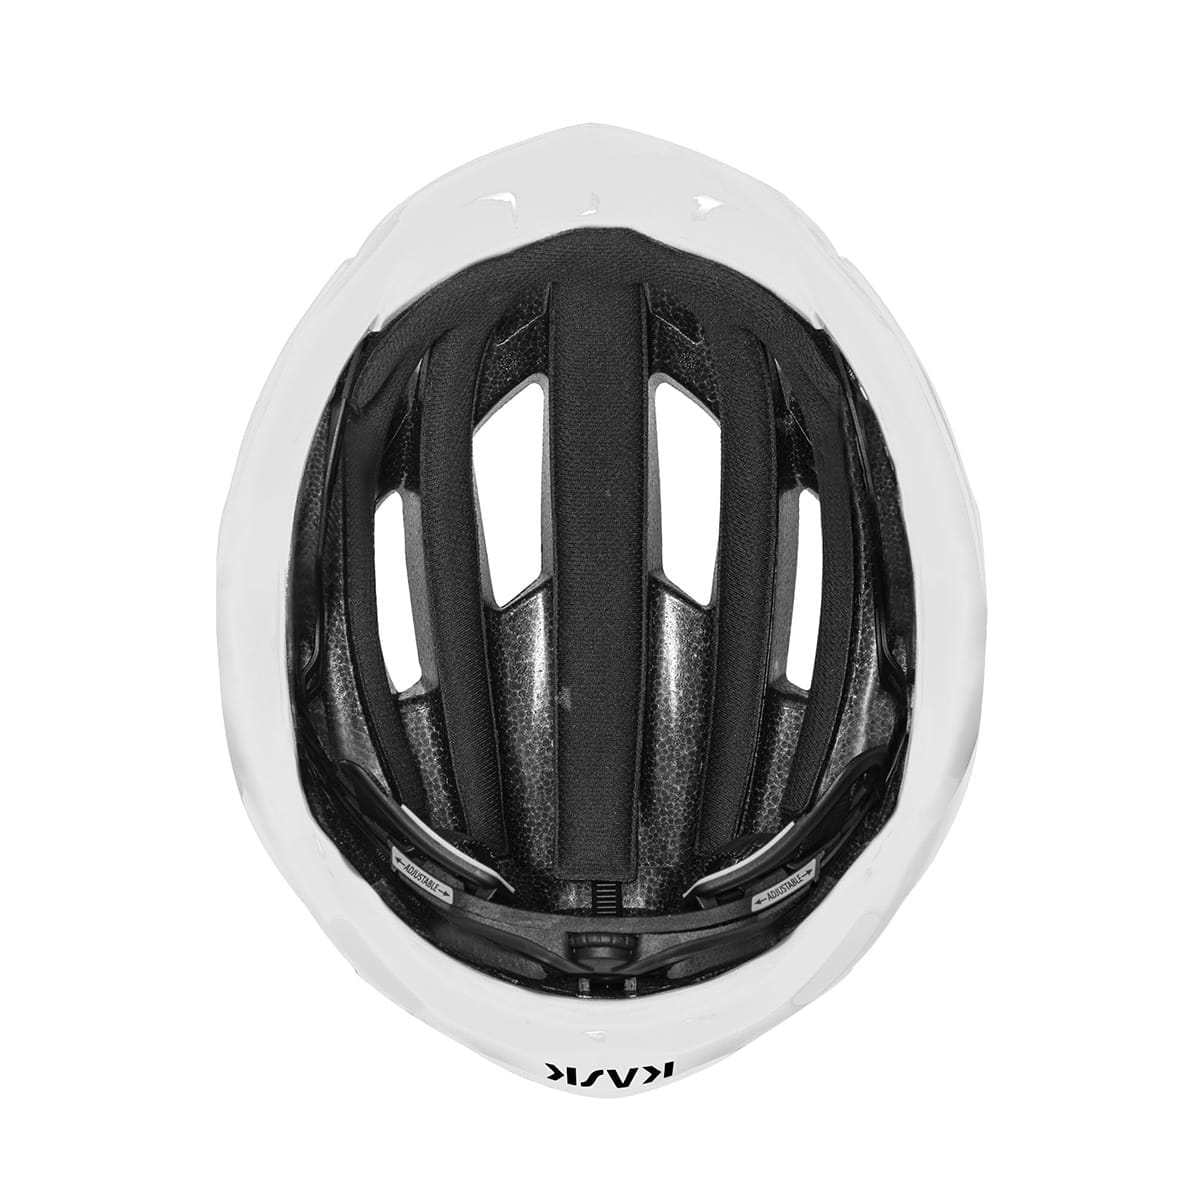 Casque Route KASK MOJITO CUBED Blanc